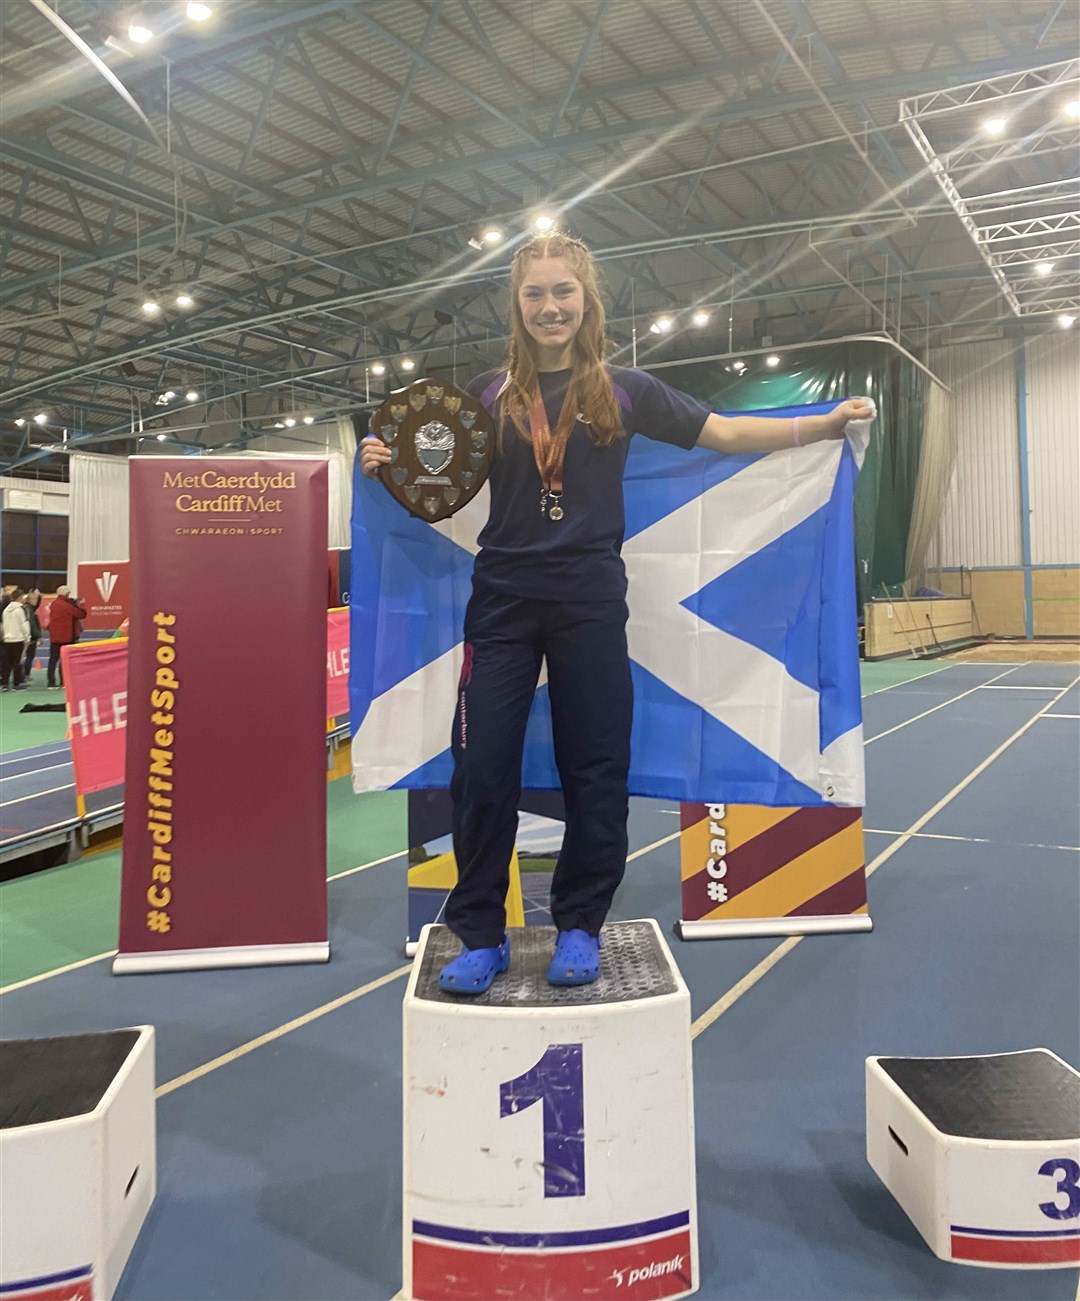 Top of the podium as best Scots athlete in Cardiff.